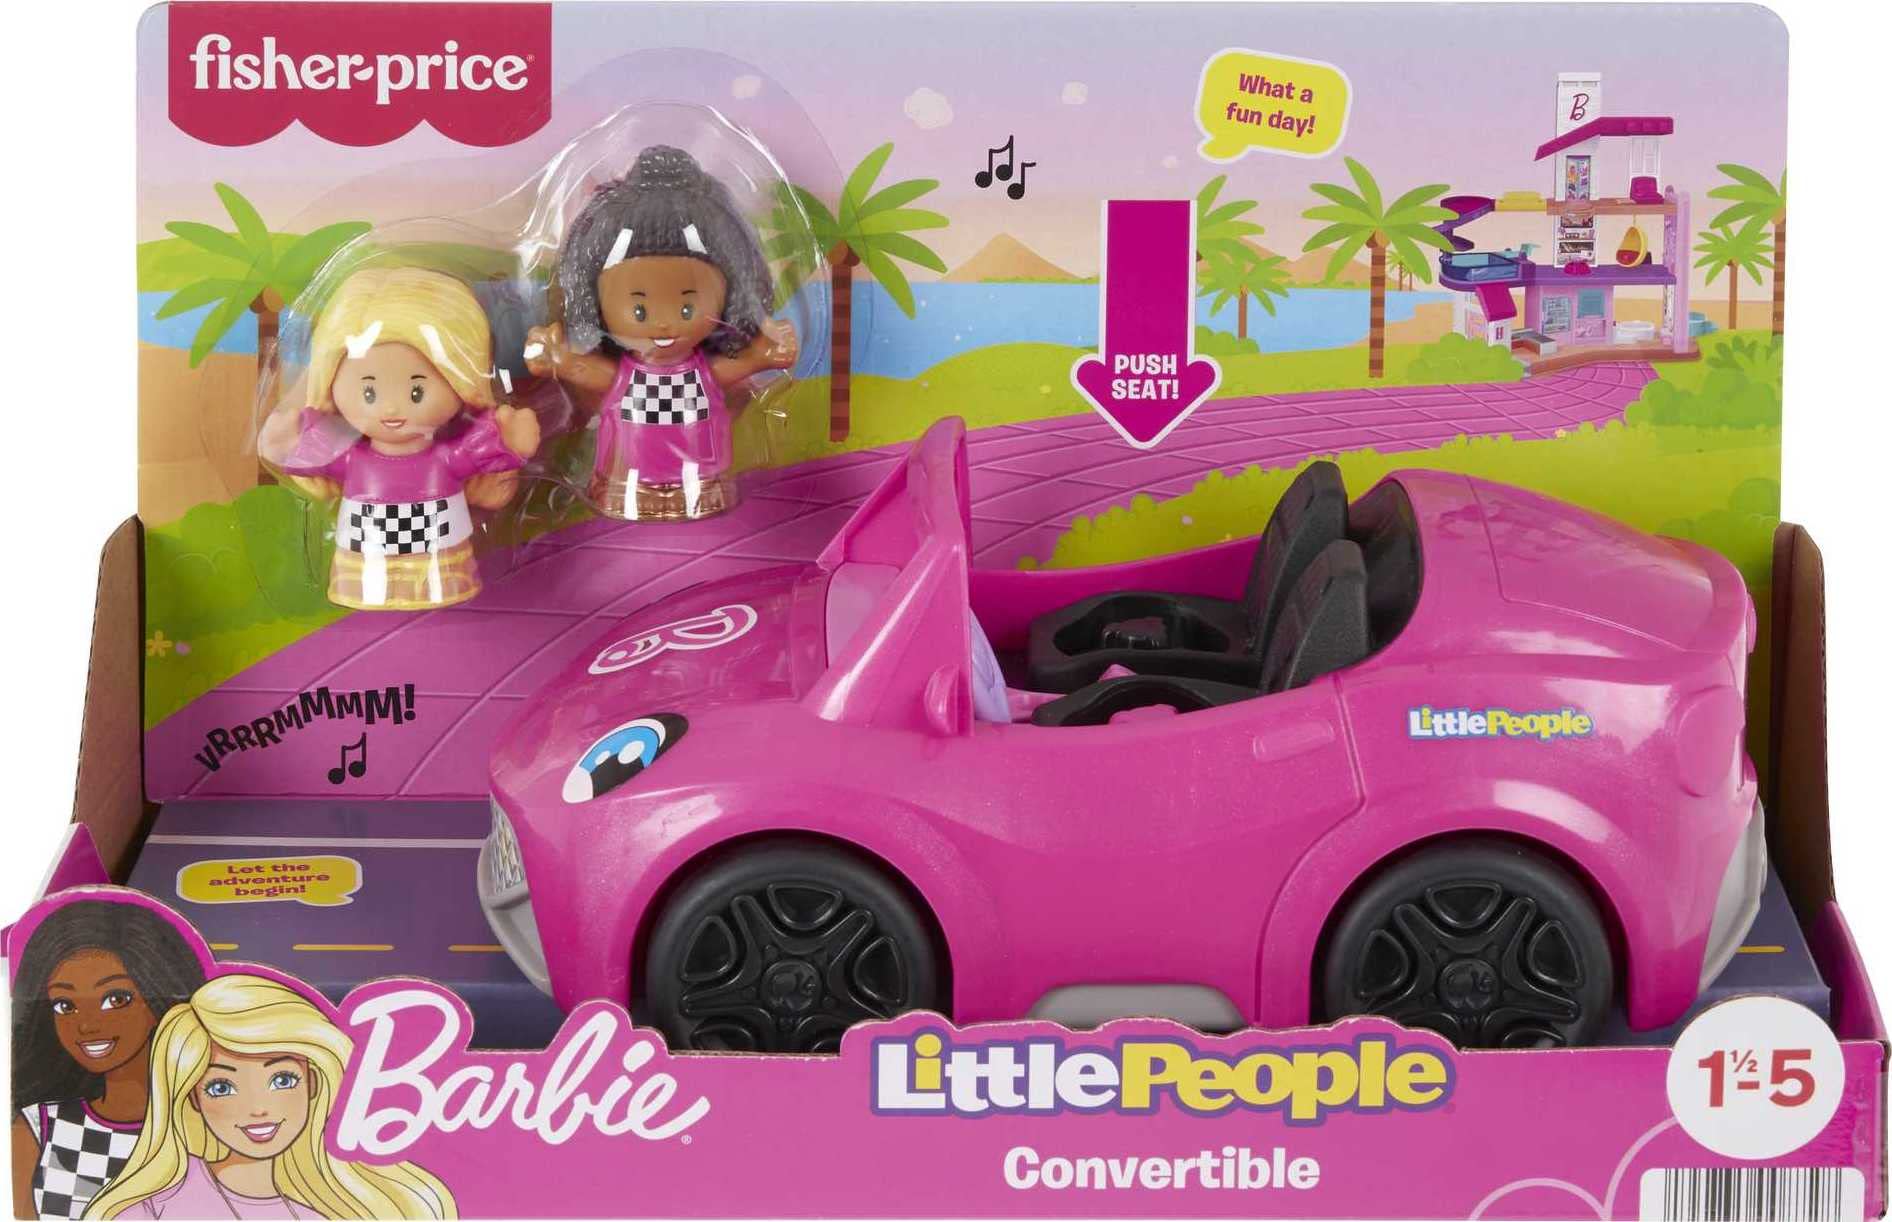 Little People Barbie Toddler Toy Car Convertible with Music Sounds & 2 Figures for Pretend Play Ages 18+ Months